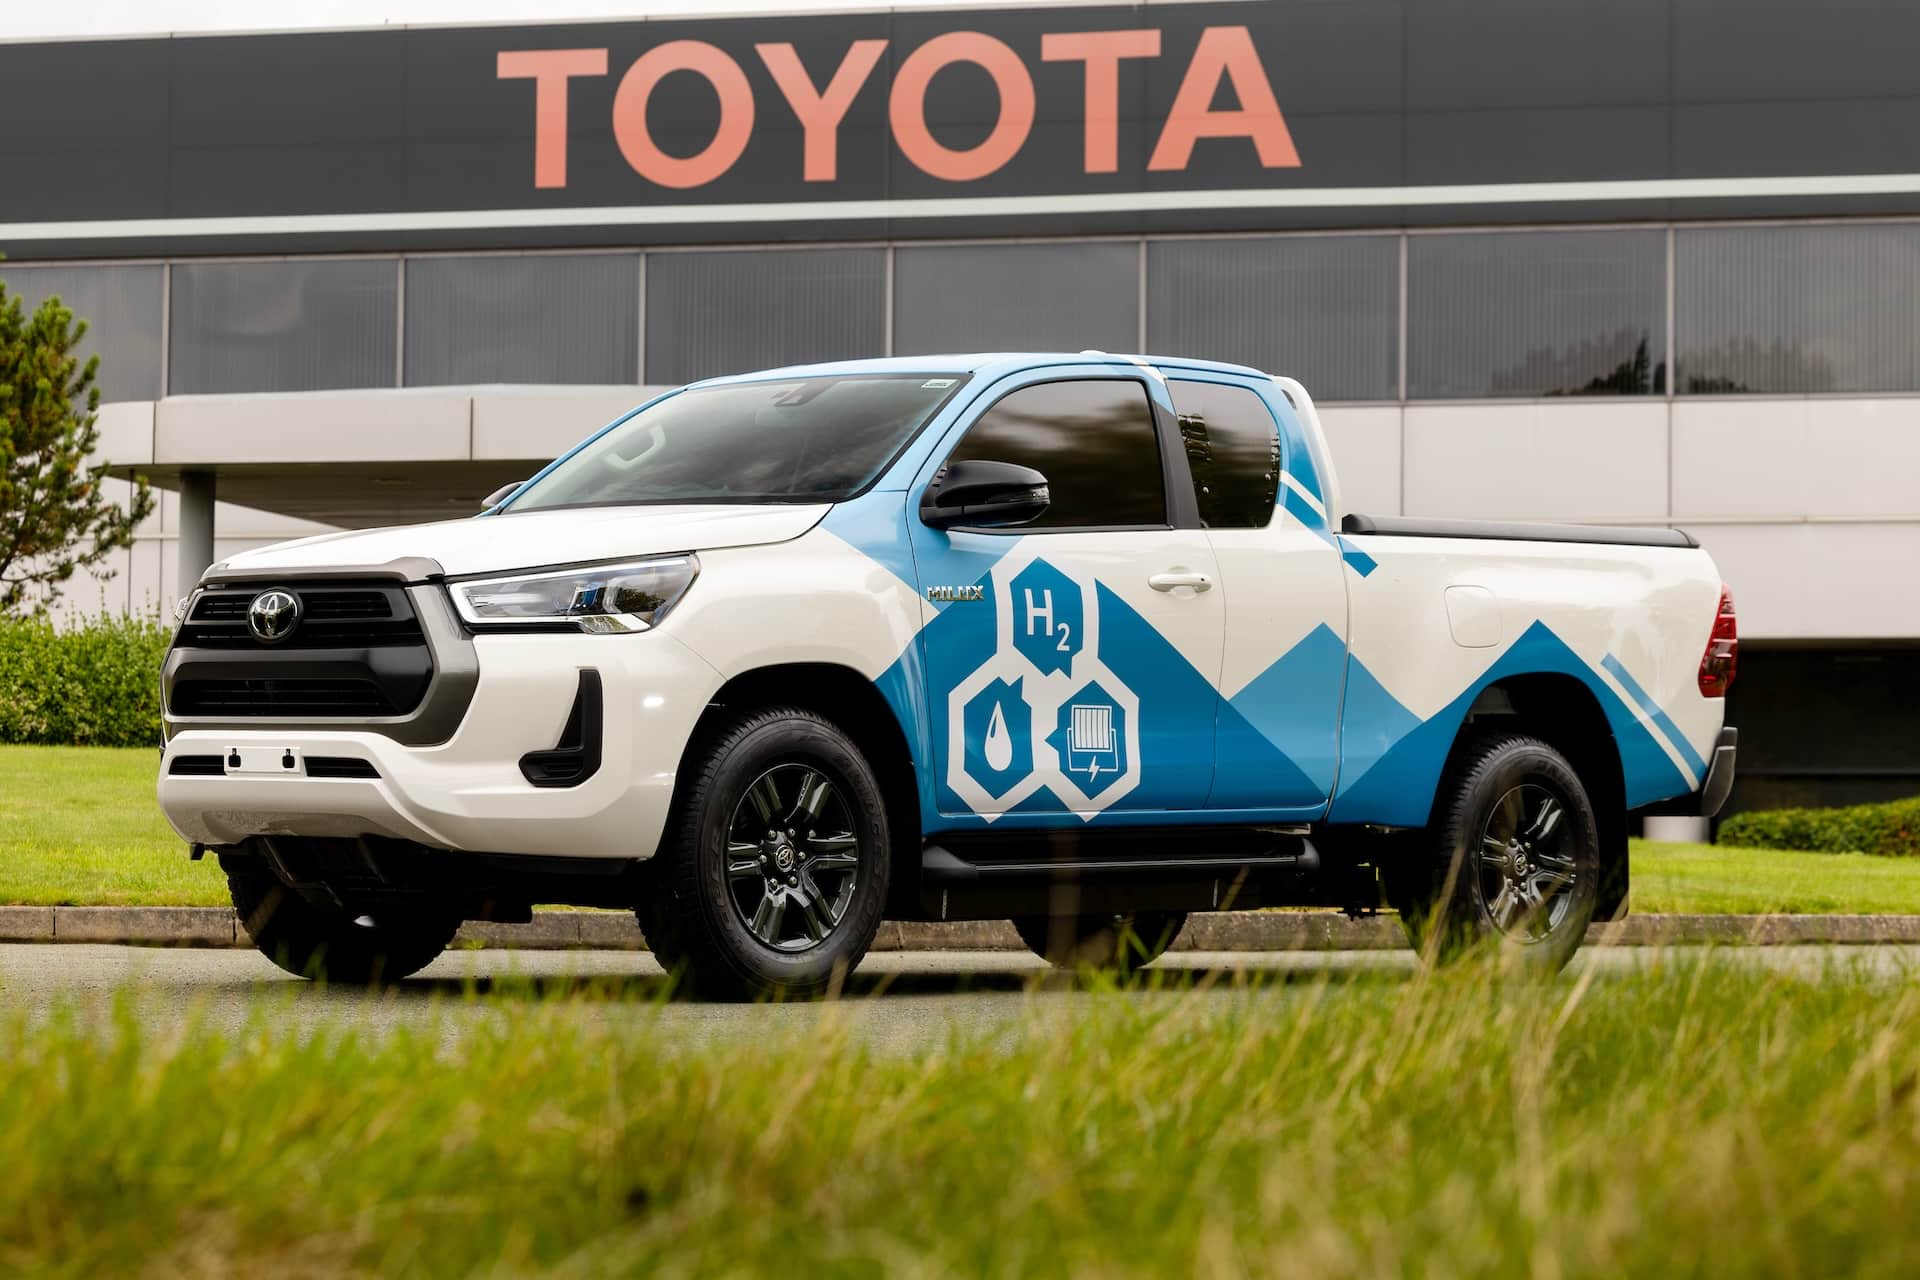 Toyota reveals prototype of Hilux powered by hydrogen